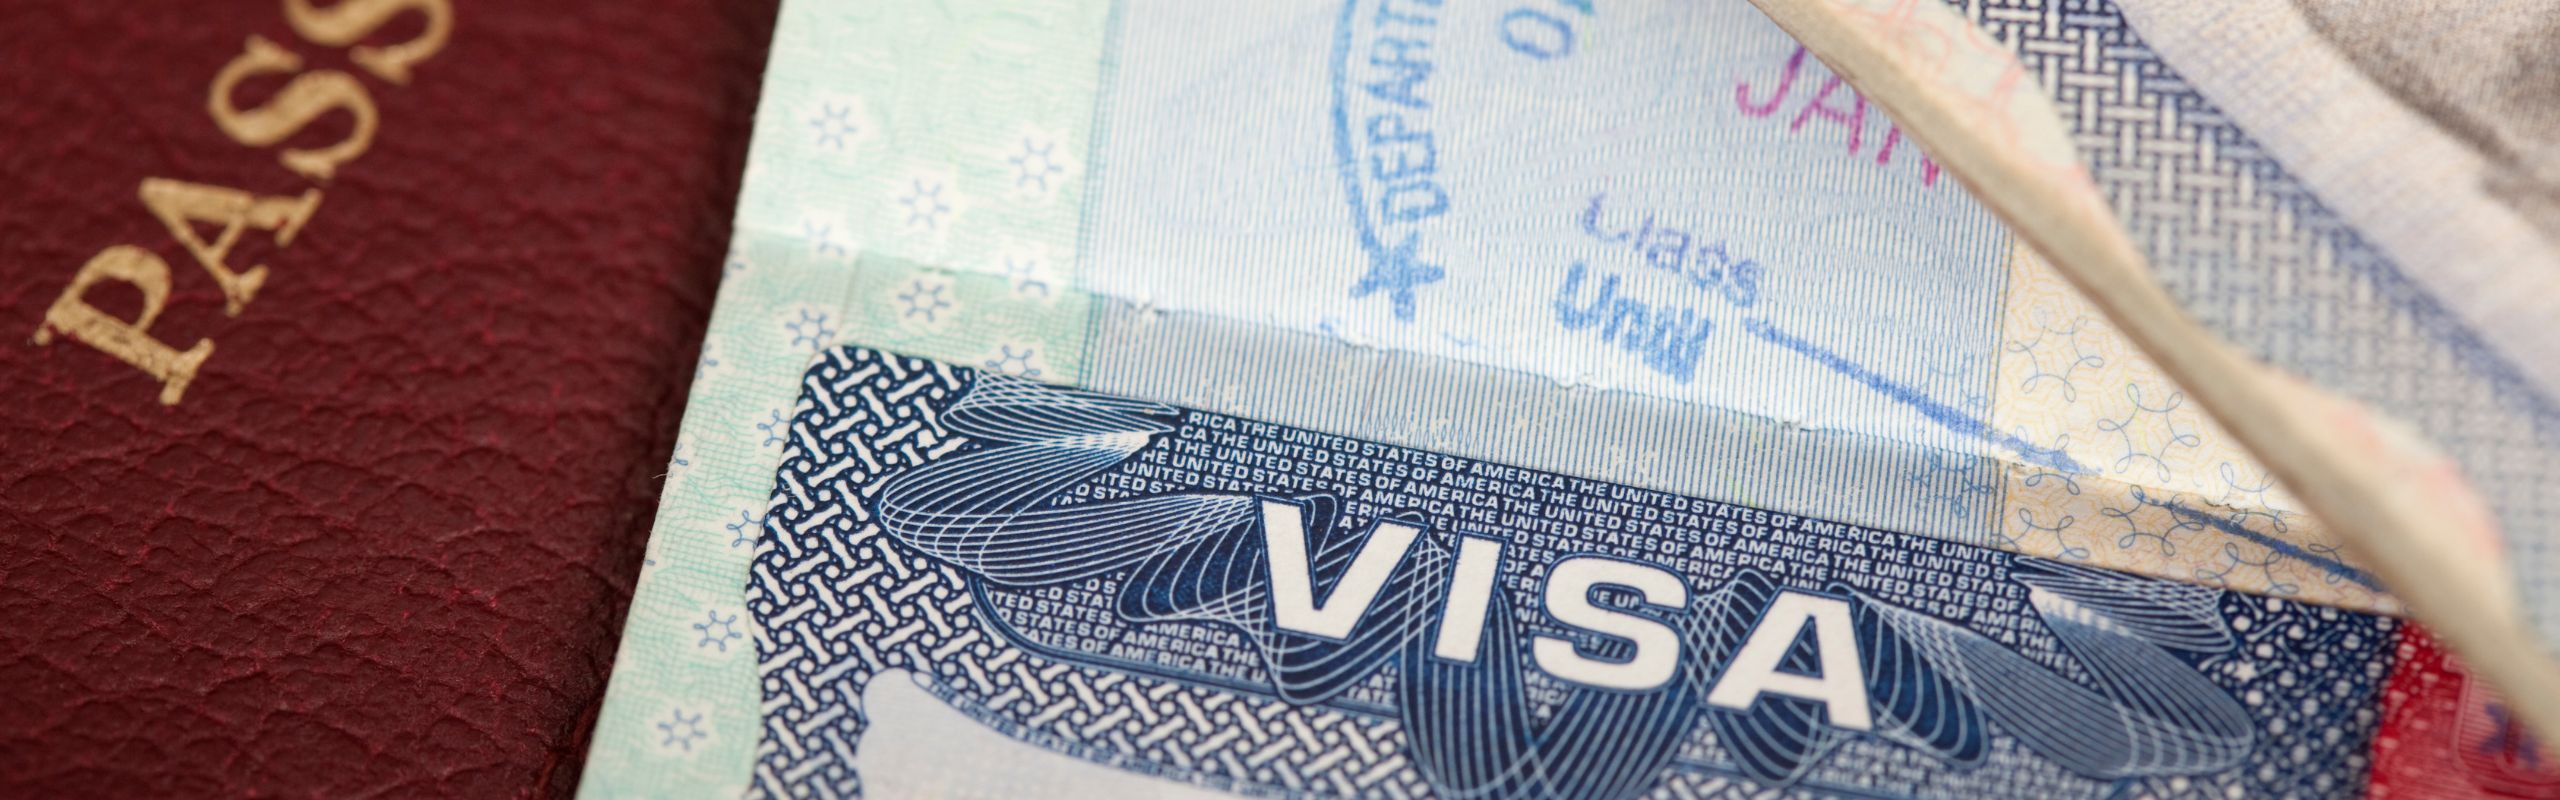 Not Selected in the H-1B Cap? You Still Have Options